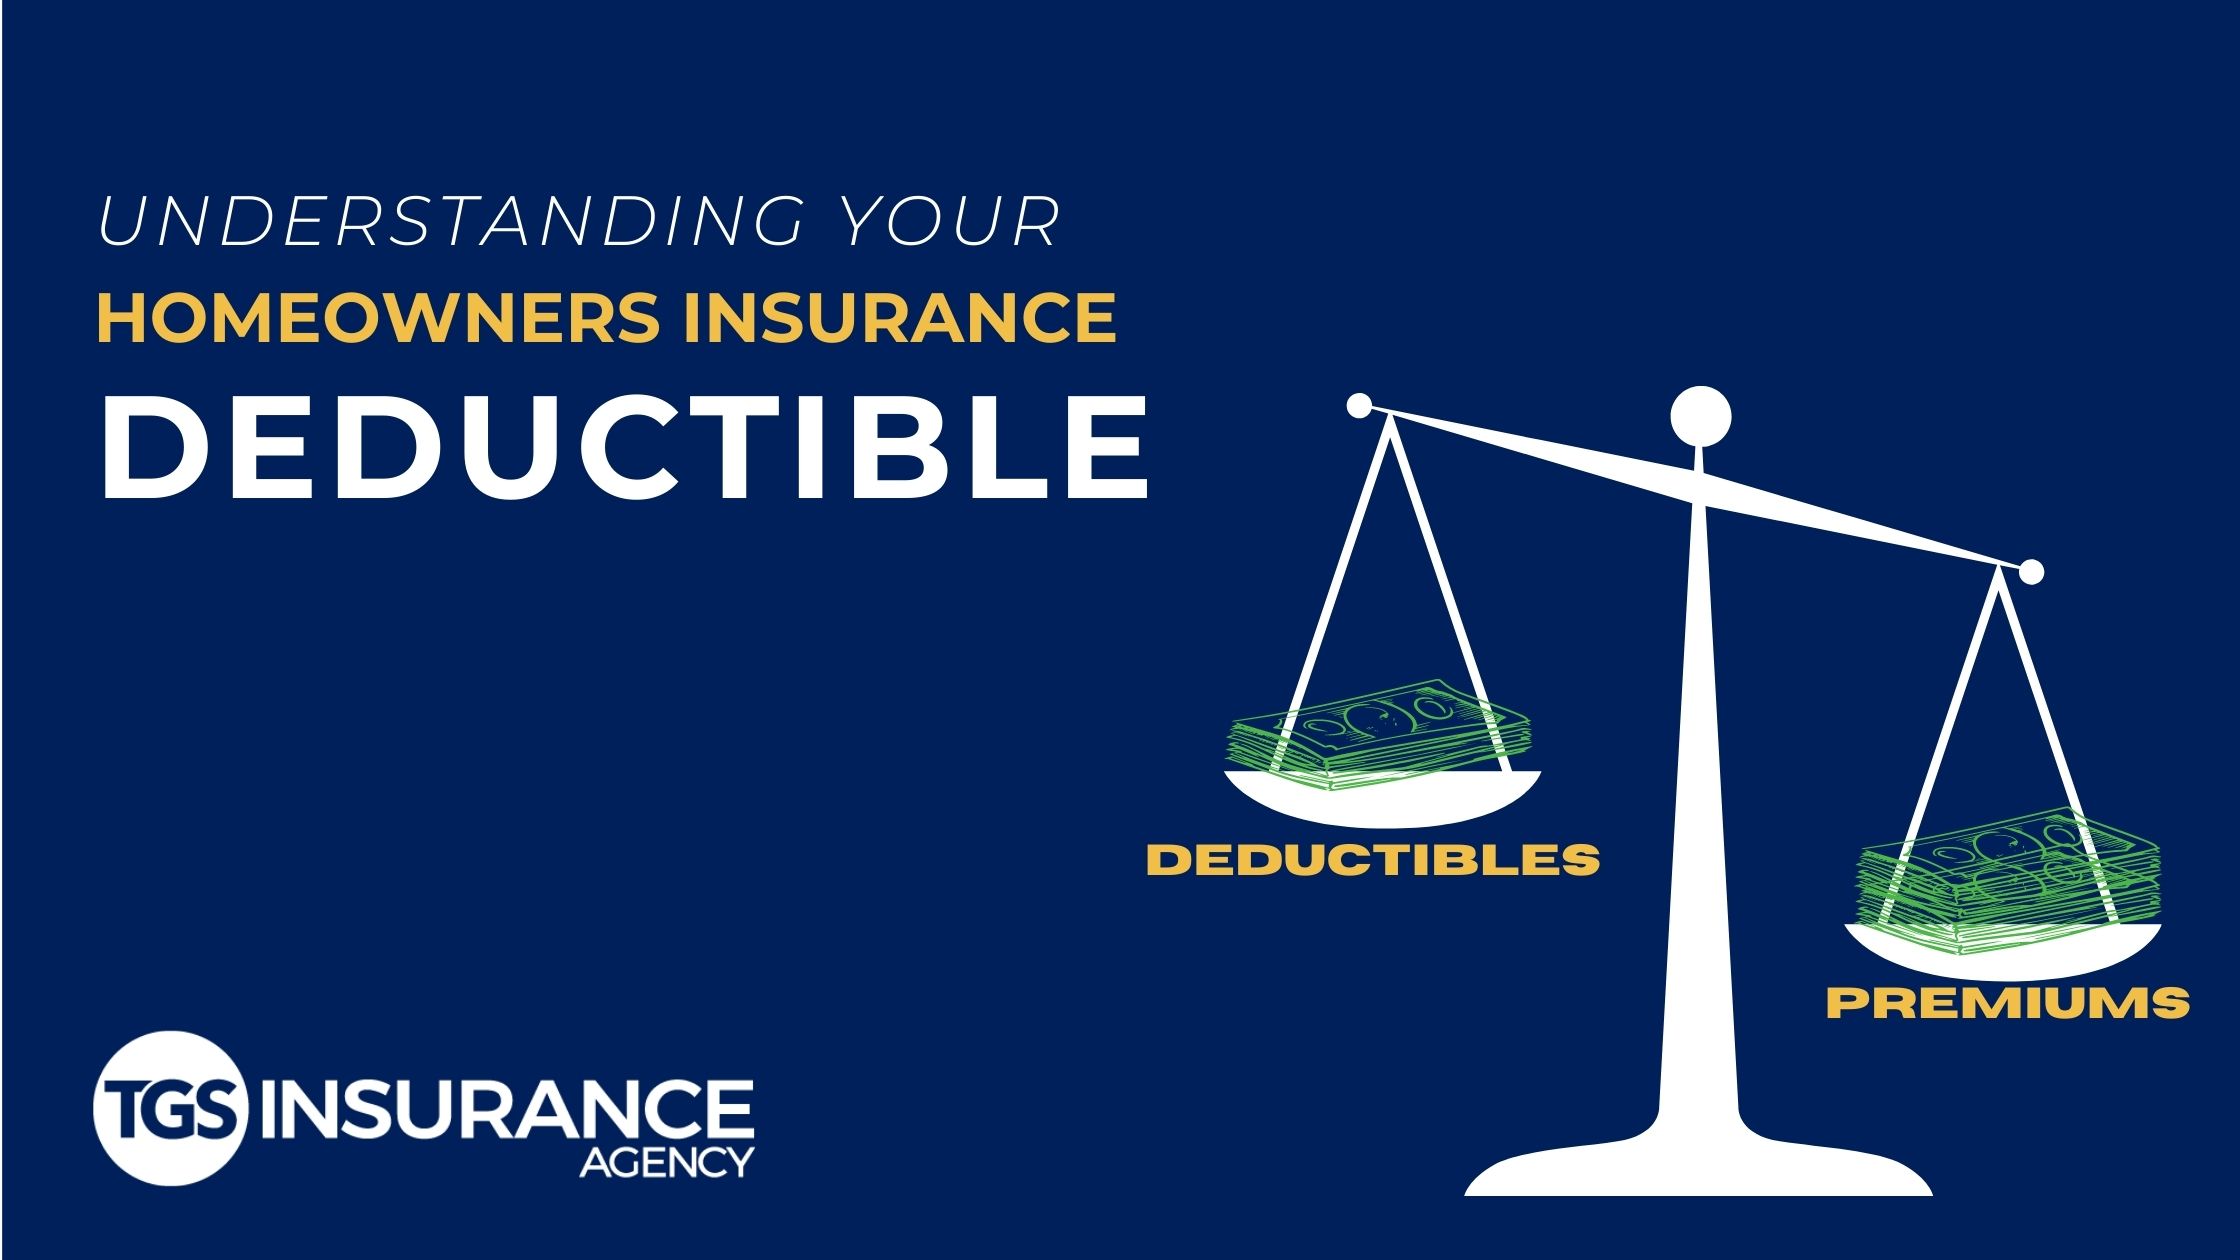 homeowners-insurance-deductible-explained-tgs-insurance-agency